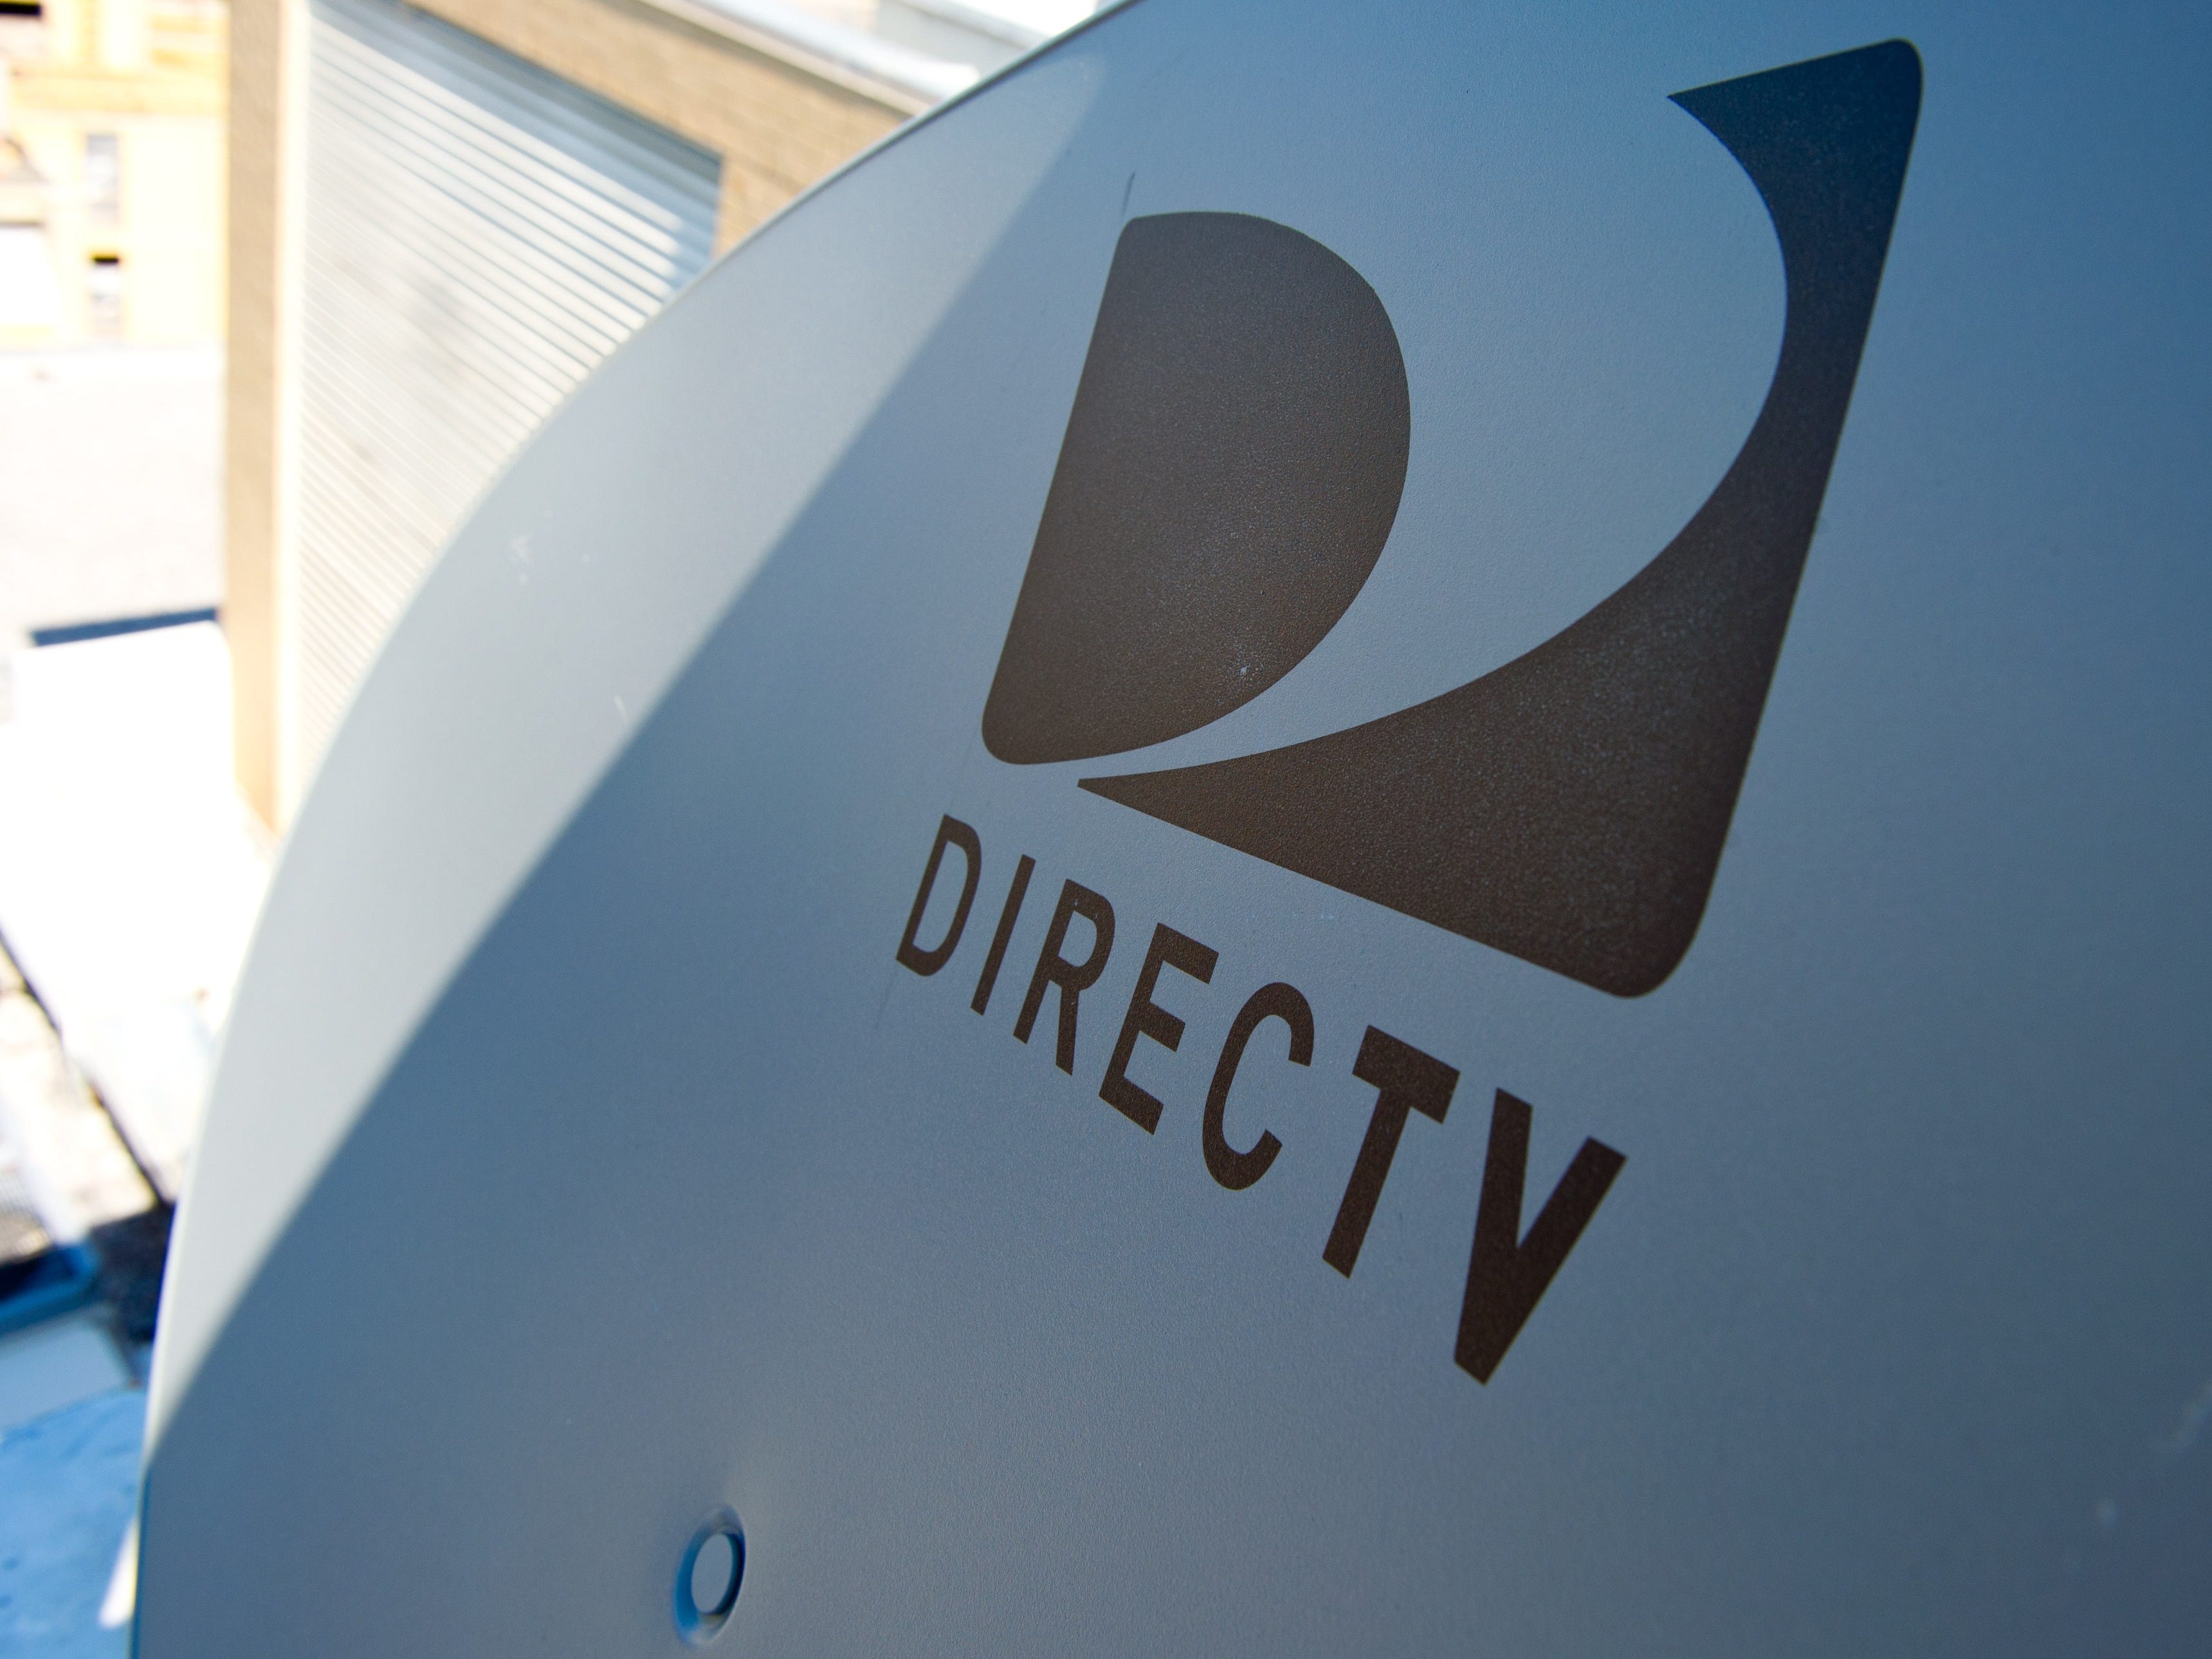 <p>DirecTV will lay off several hundred workers in management roles, according to a <a href="https://www.hollywoodreporter.com/business/business-news/directv-layoffs-cord-cutting-1235297229/#recipient_hashed=7fa841db0df176c1fd2434c59e5395c6baa5a6be16c593bc4c480e4d3d871d35&recipient_salt=61ae3d81f58e746422e587061ccfbe2f16eeebdd455f6a9b705a56ec35790c12">report</a> from The Hollywood Reporter. Employees were told in the first week of January. </p><p>The satellite TV business has faced slowing revenues as more people choose to cut the cord and pay for streaming services over cable TV. </p><p>"The entire pay-TV industry is impacted by the secular decline and the increasing rates to secure and distribute programming. We're adjusting our operations costs to align with these changes and will continue to invest in new entertainment products and service enhancements," a spokesperson for DirecTV told The Hollywood Reporter. </p>